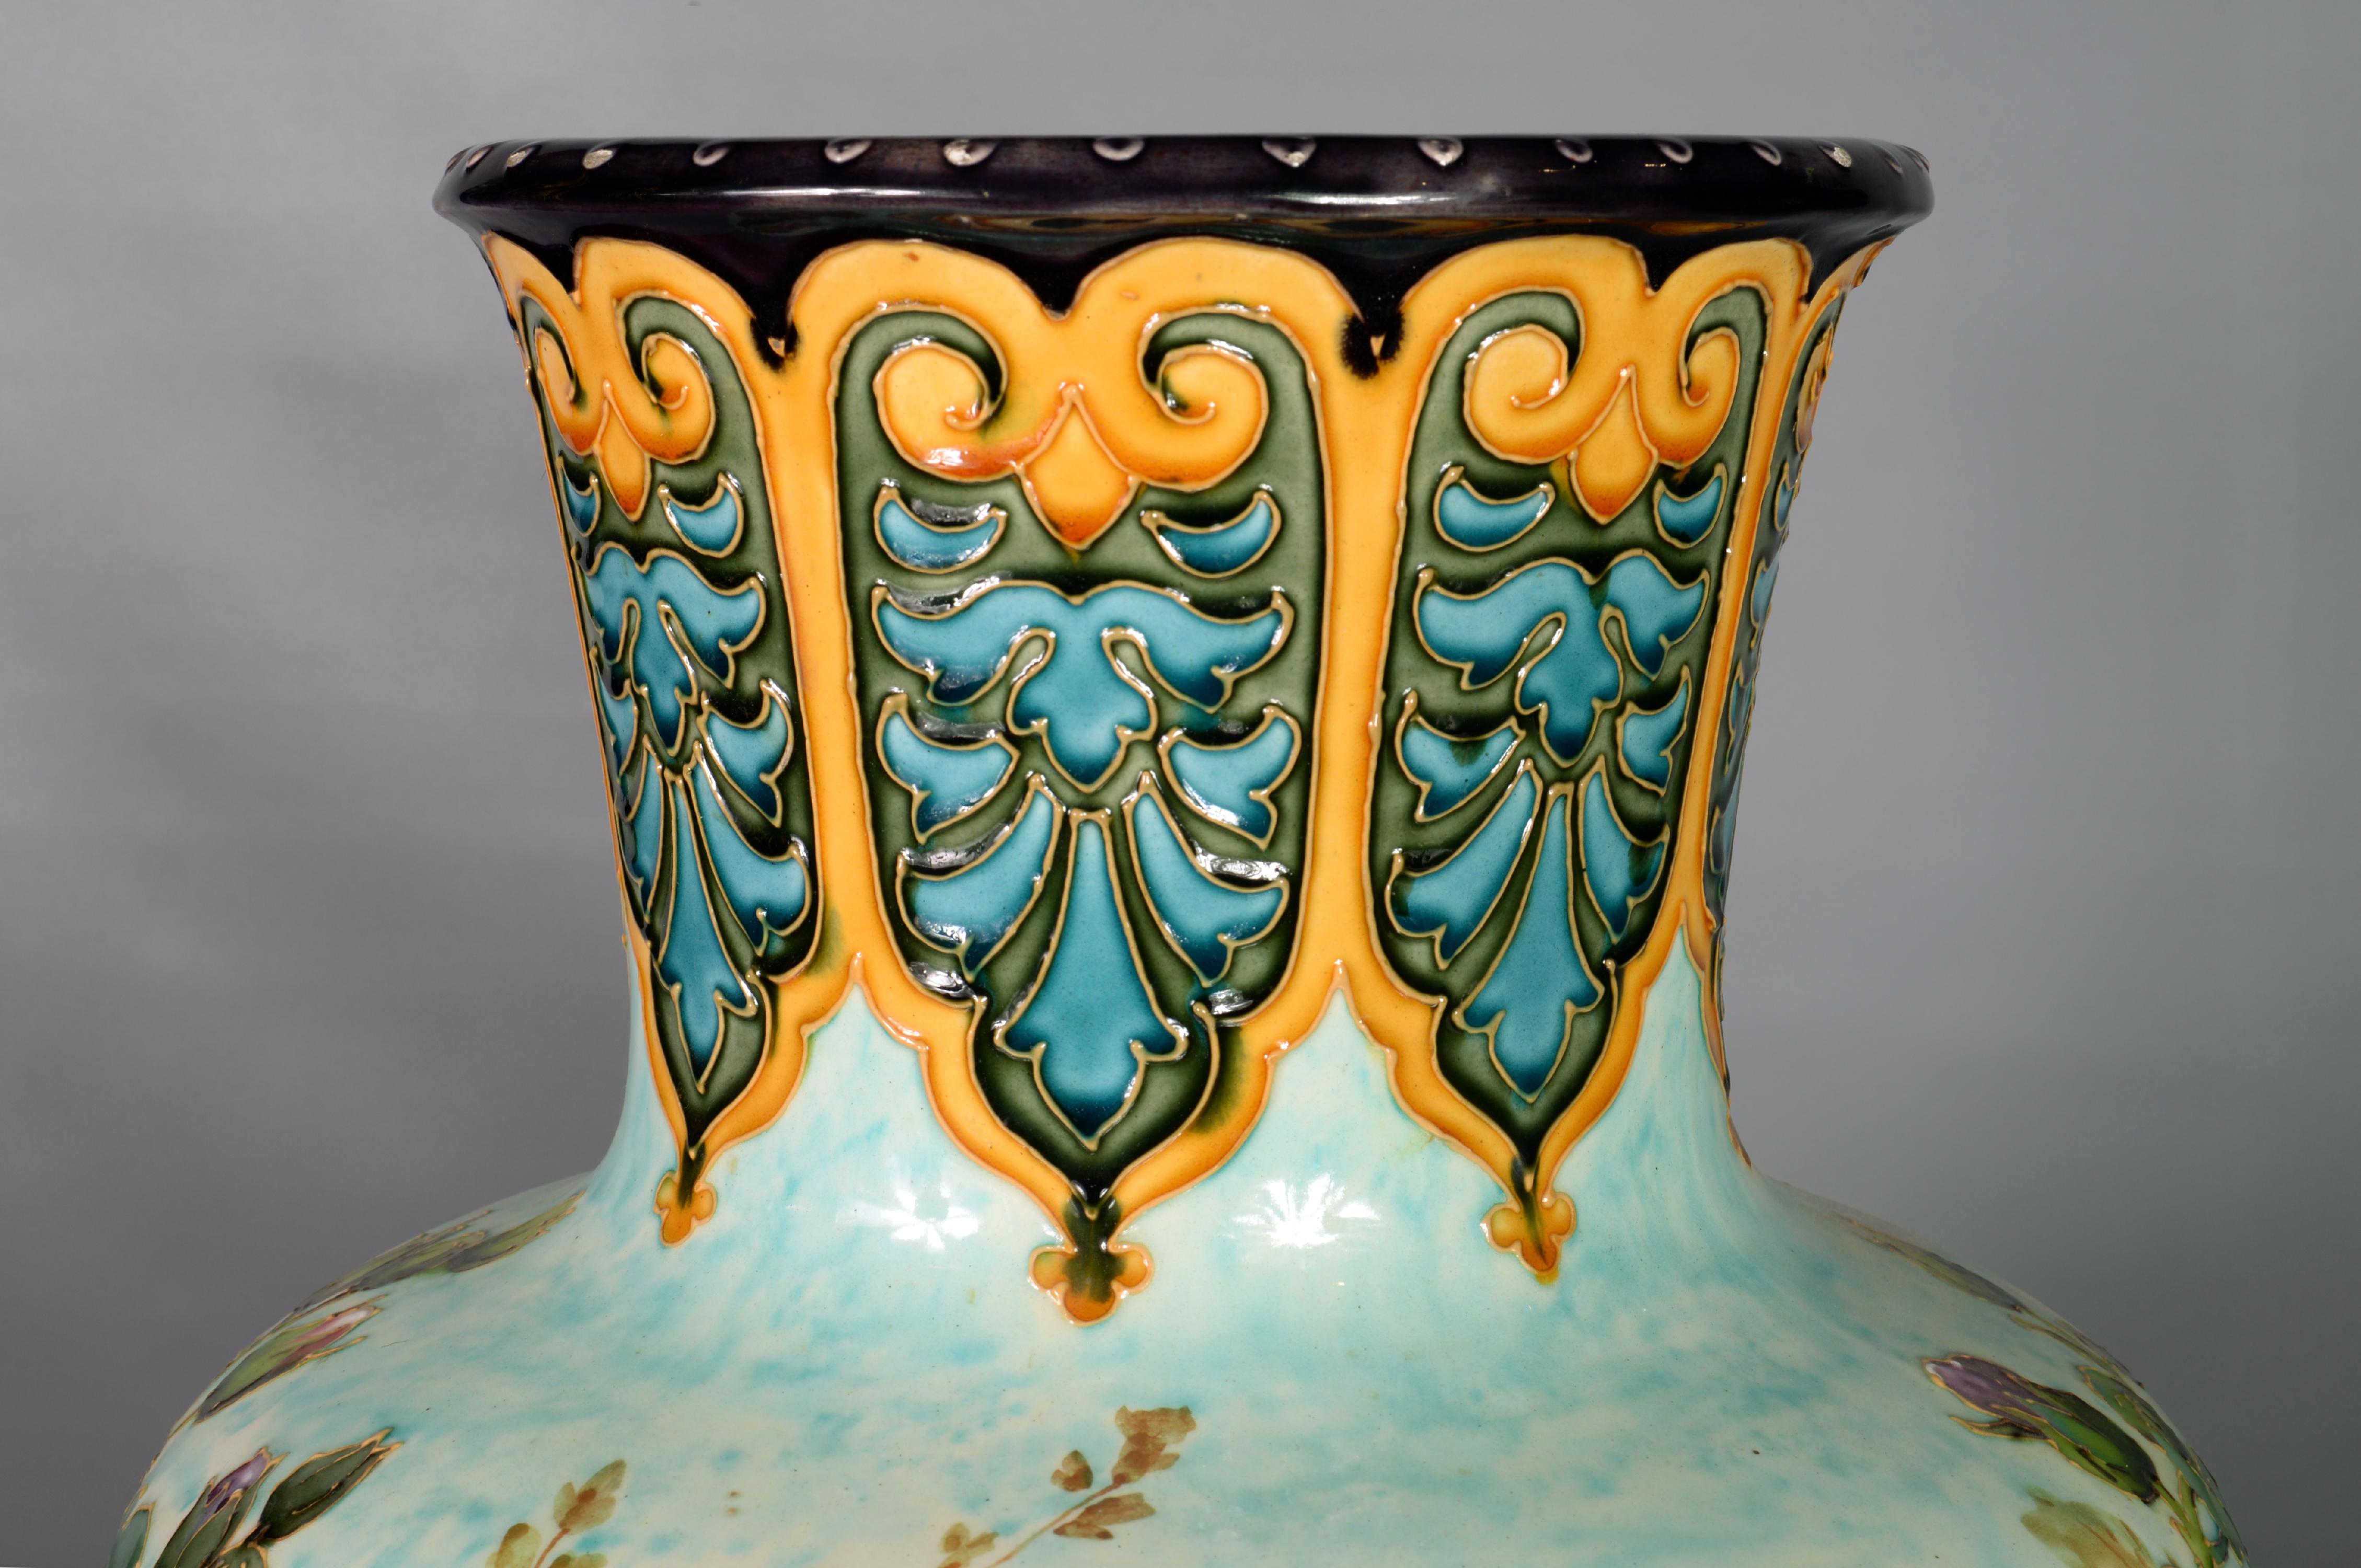 19th Century Baluster Napoleon III Vase in Porcelain on a Base with Scales and Wood Veneer For Sale